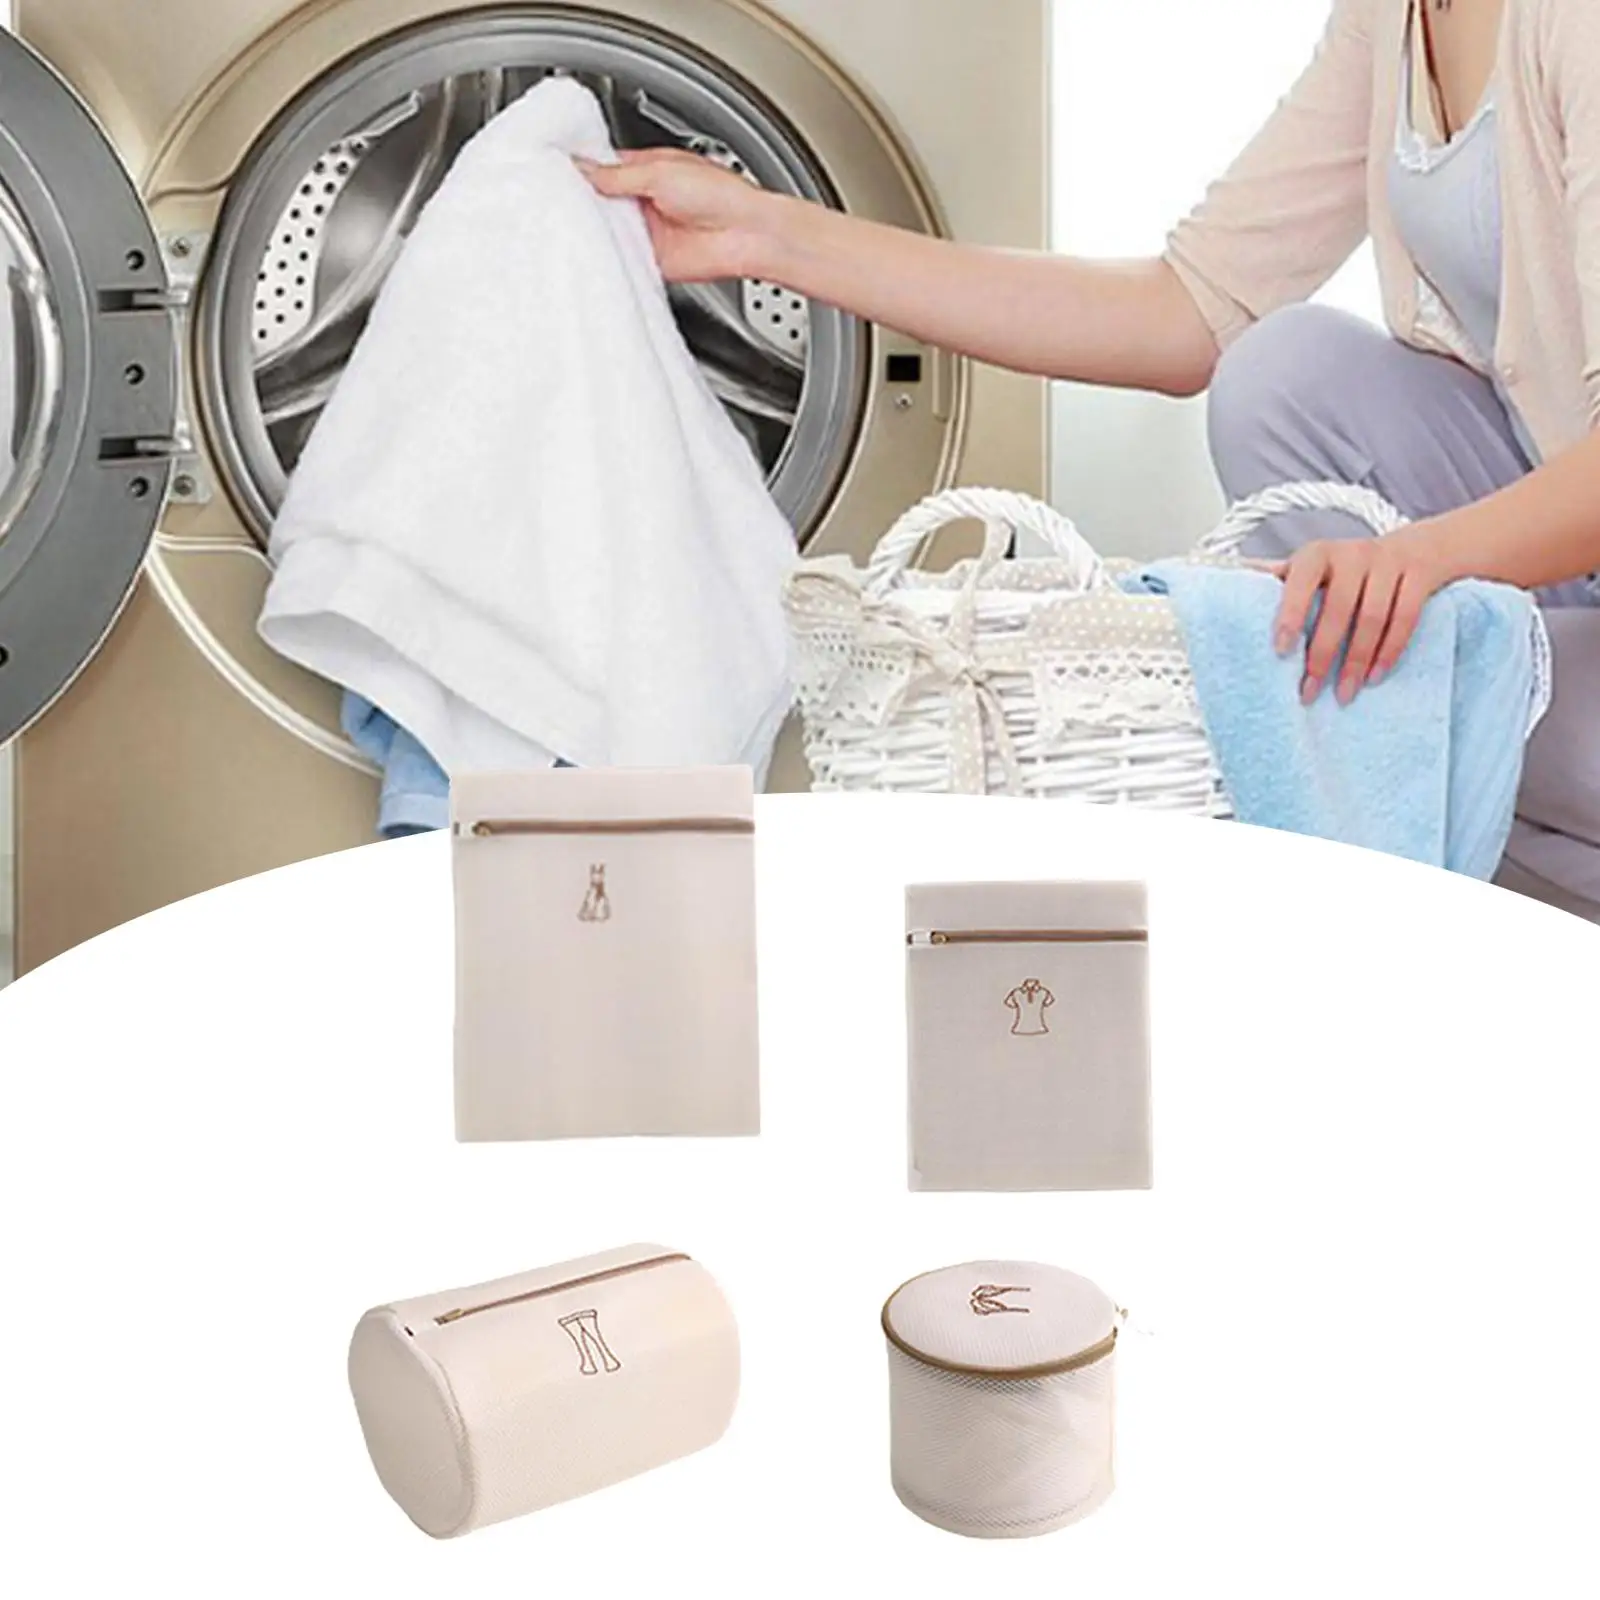 Mesh Laundry Bags Thickened with Premium Zipper Durable Household Delicates Wash Bag for Blouse Tops Underwear Lingerie T Shirt